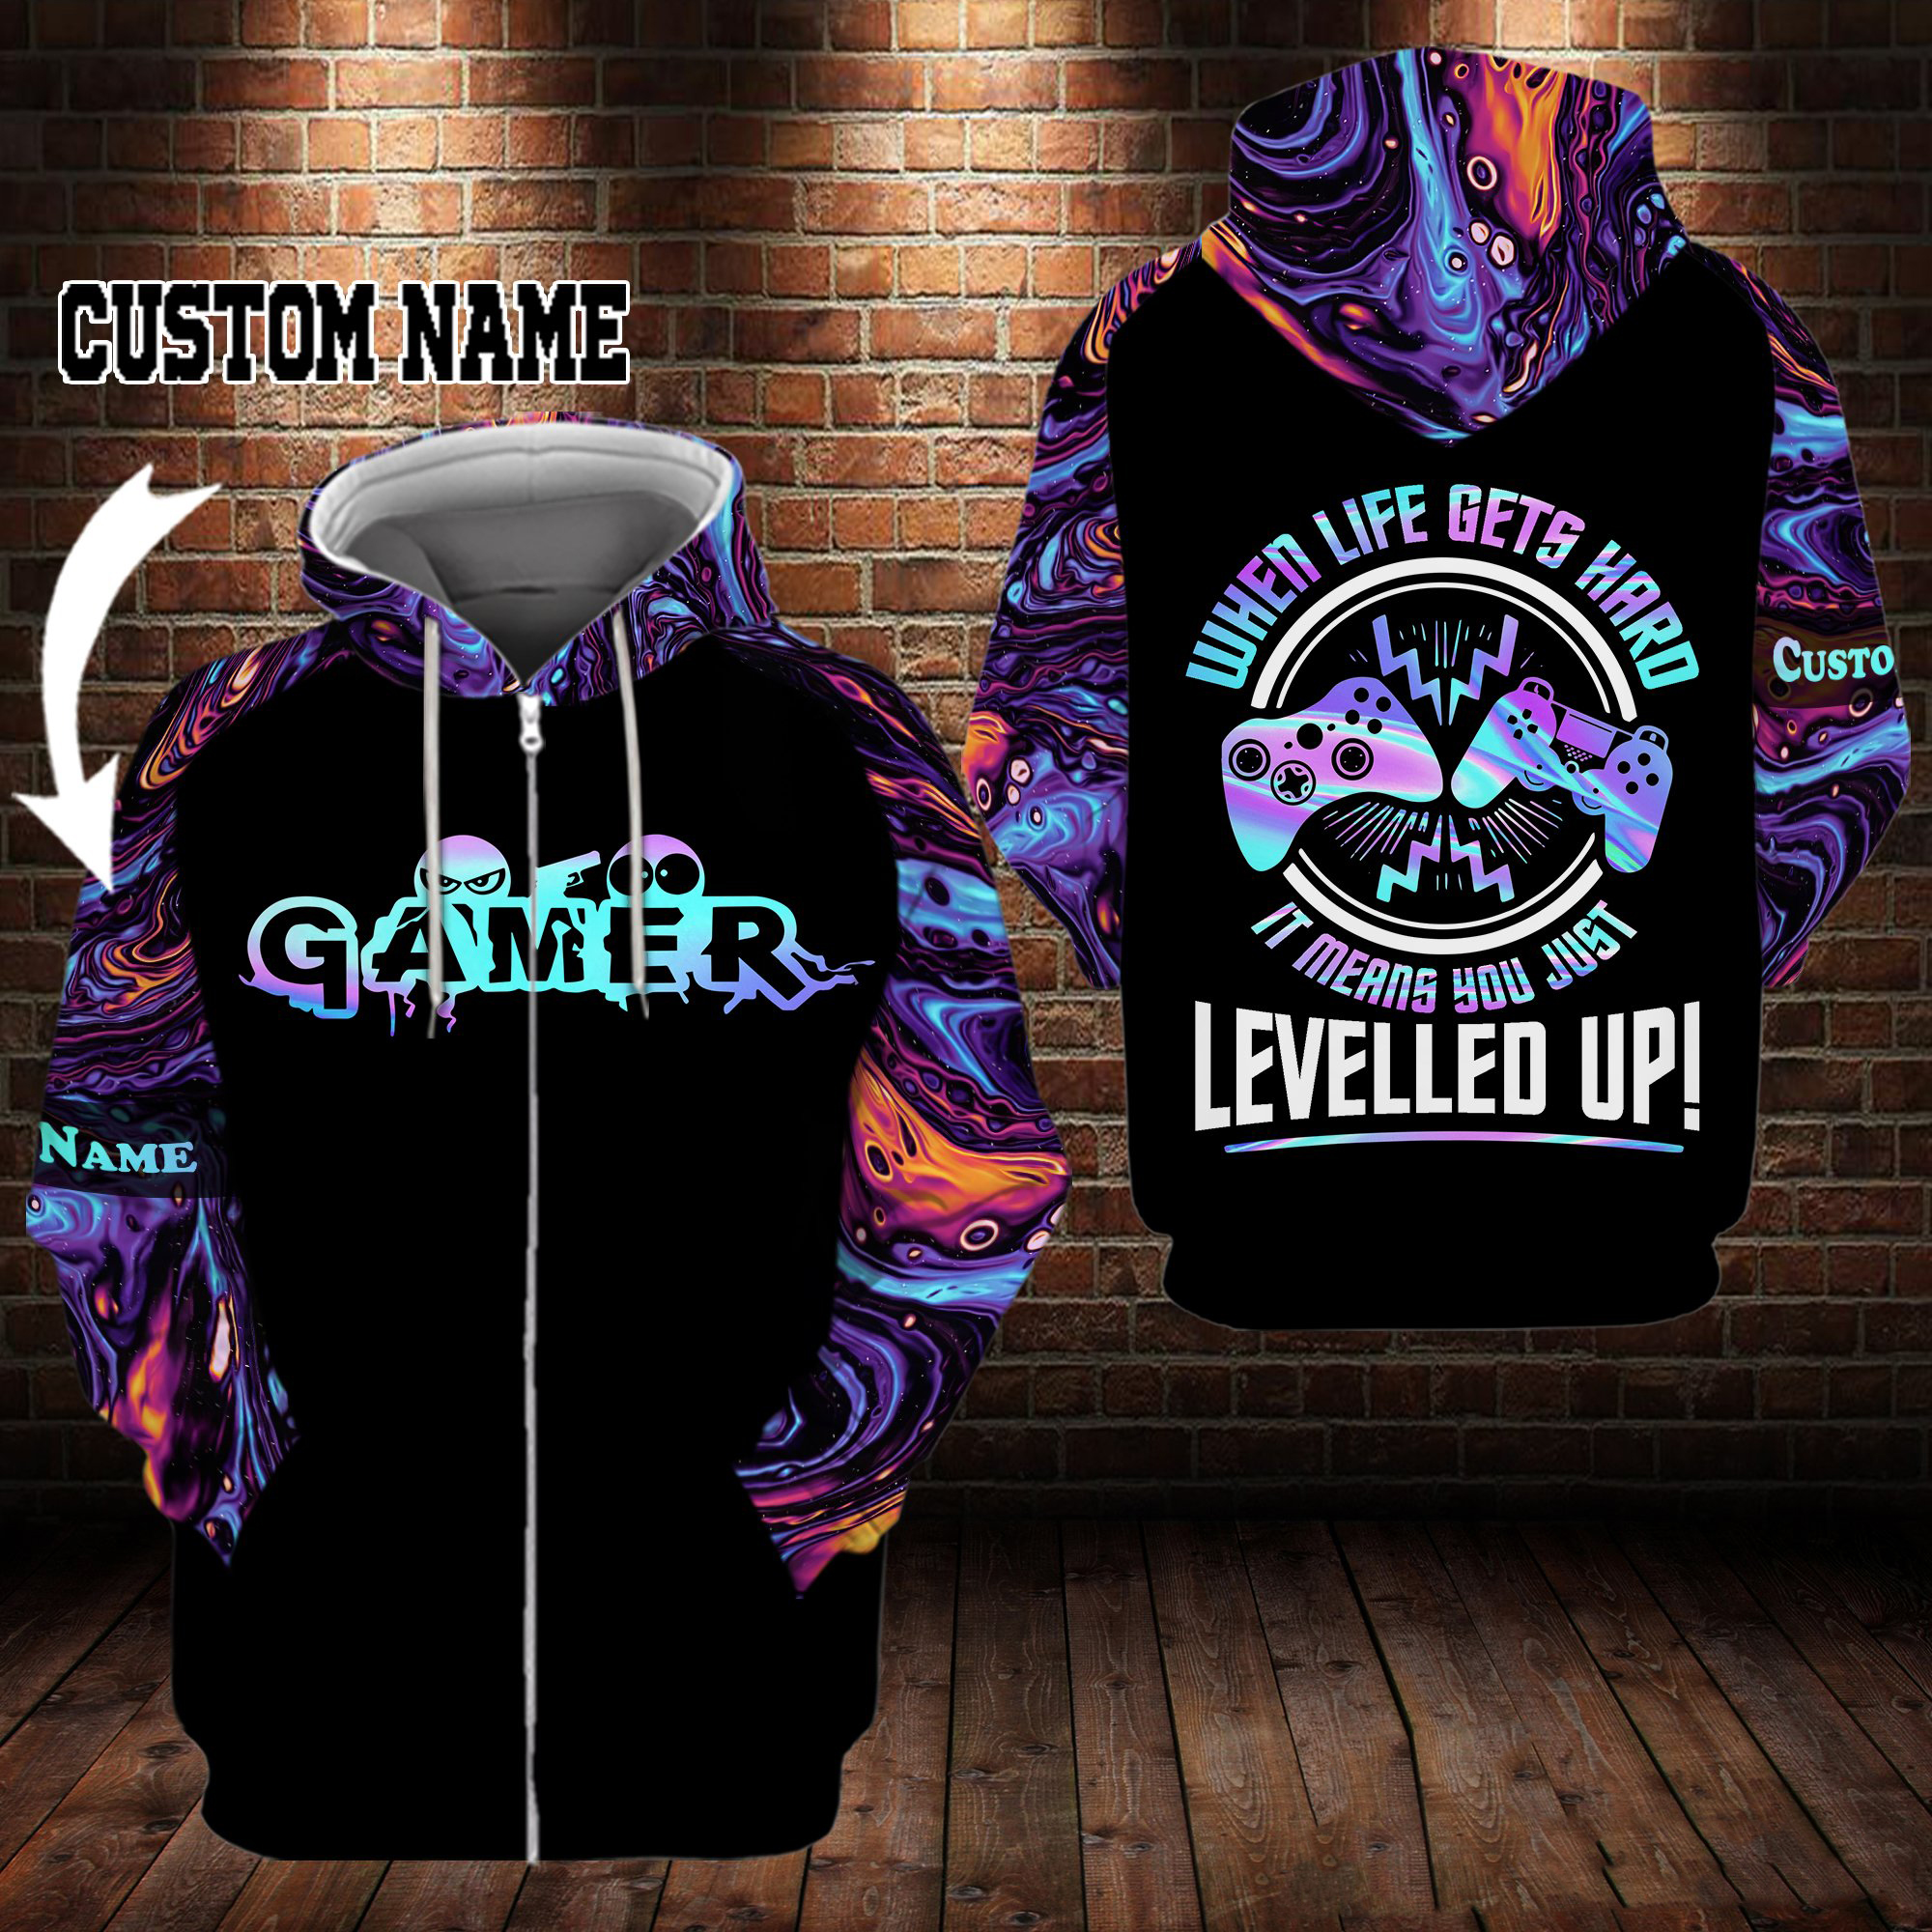 Gamer When life gets hard it means you just levelled up personalized custom name 3d zip hoodie